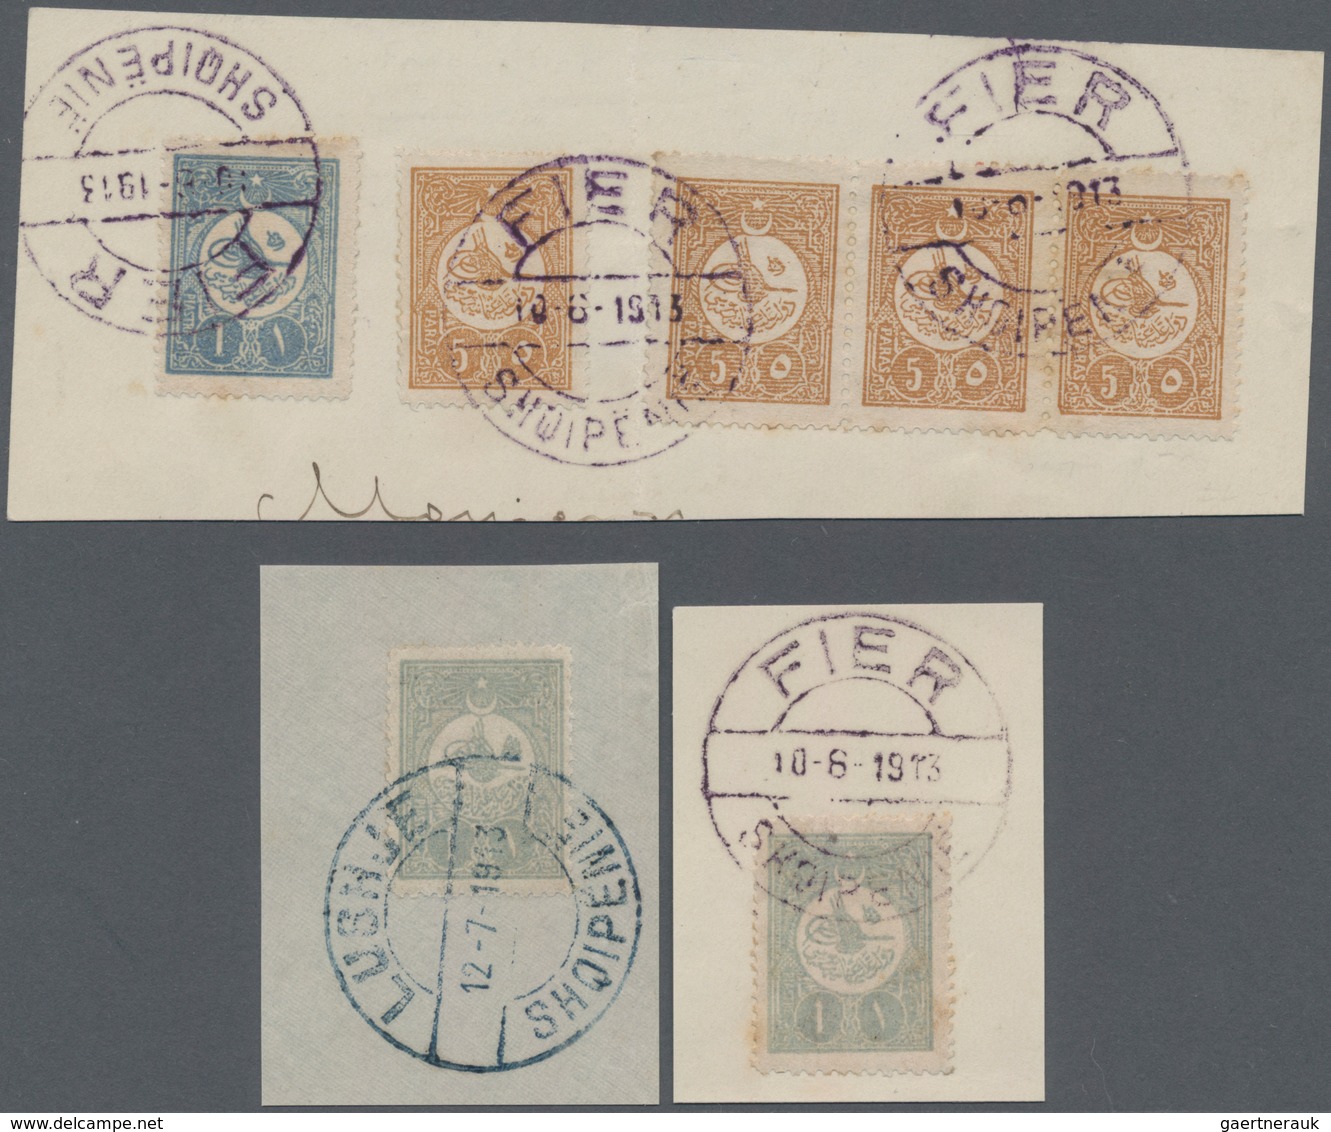 Albanien - Stempel: 1913, SHQIPENIE Type Postmarks Used On Ottoman Empire Stamps: Attractive Group C - Albanien